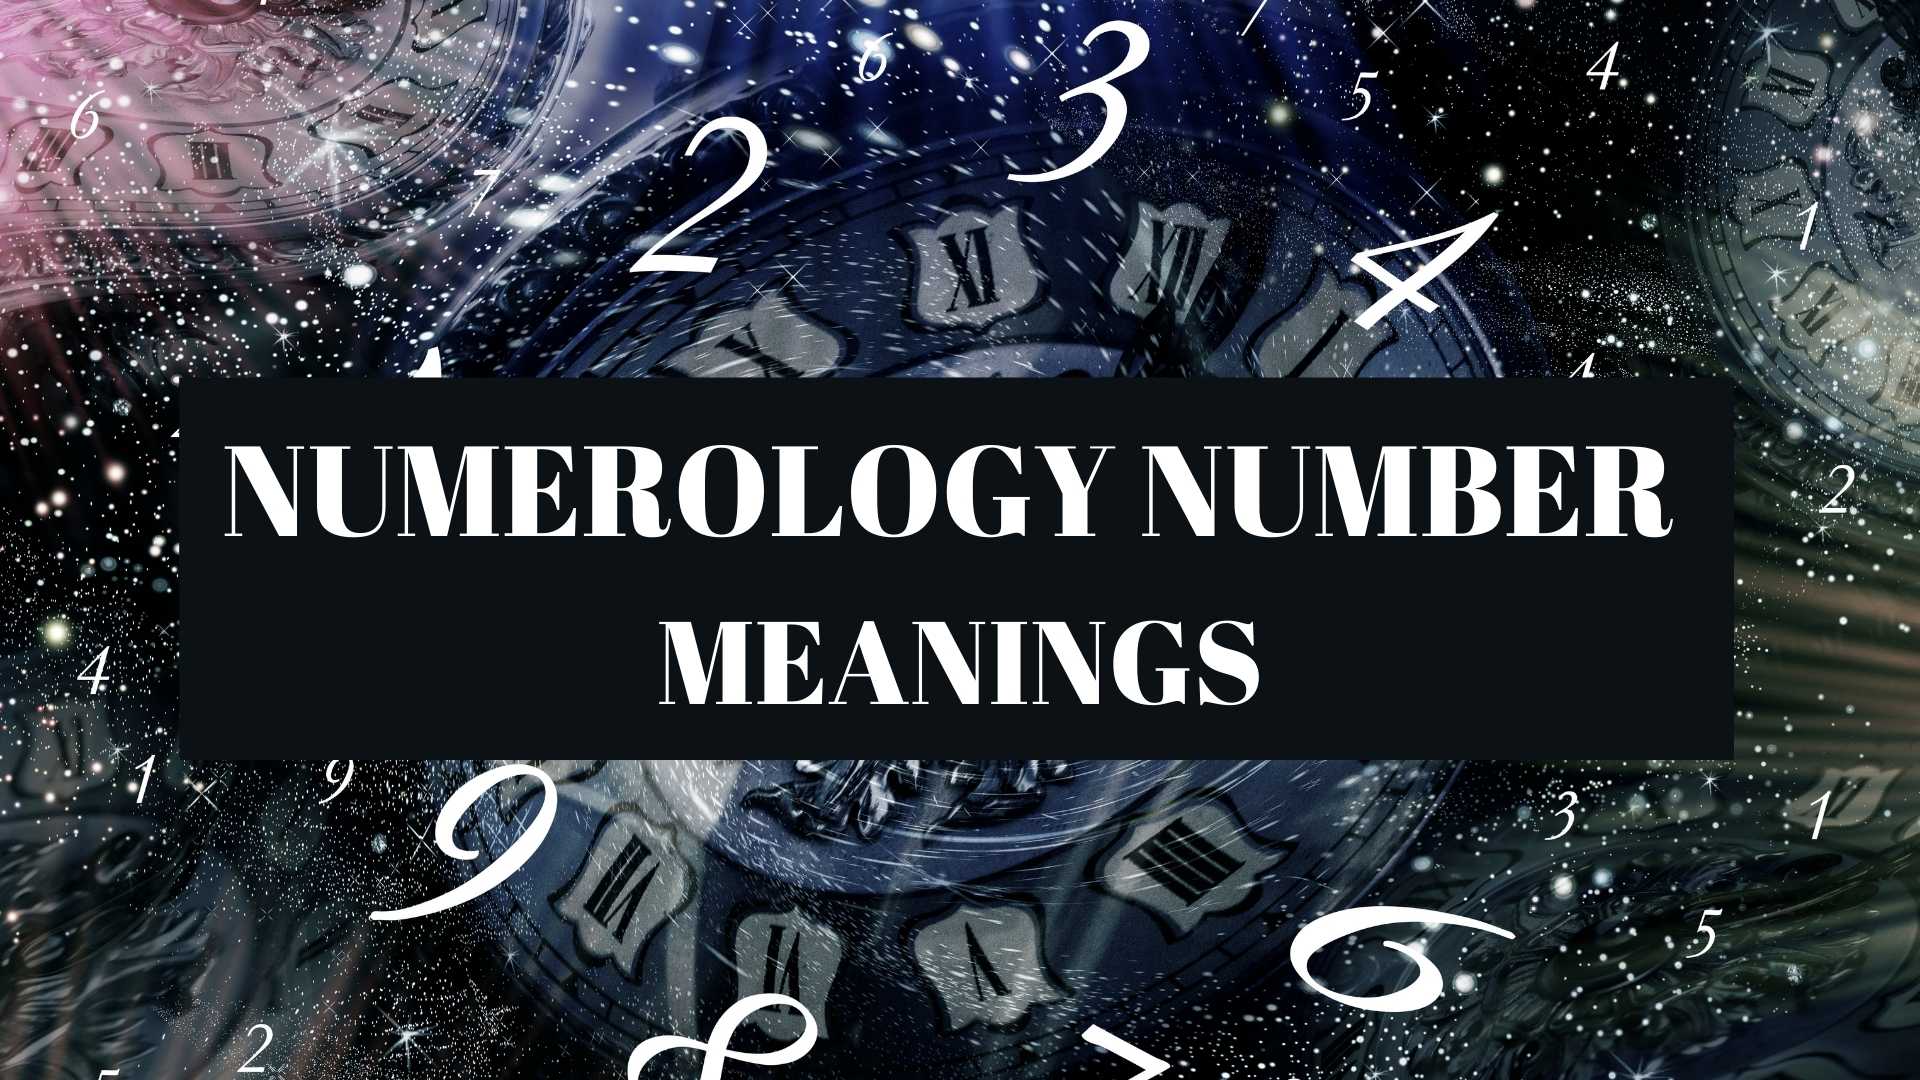 march 6 birthday numerology personality compatibility